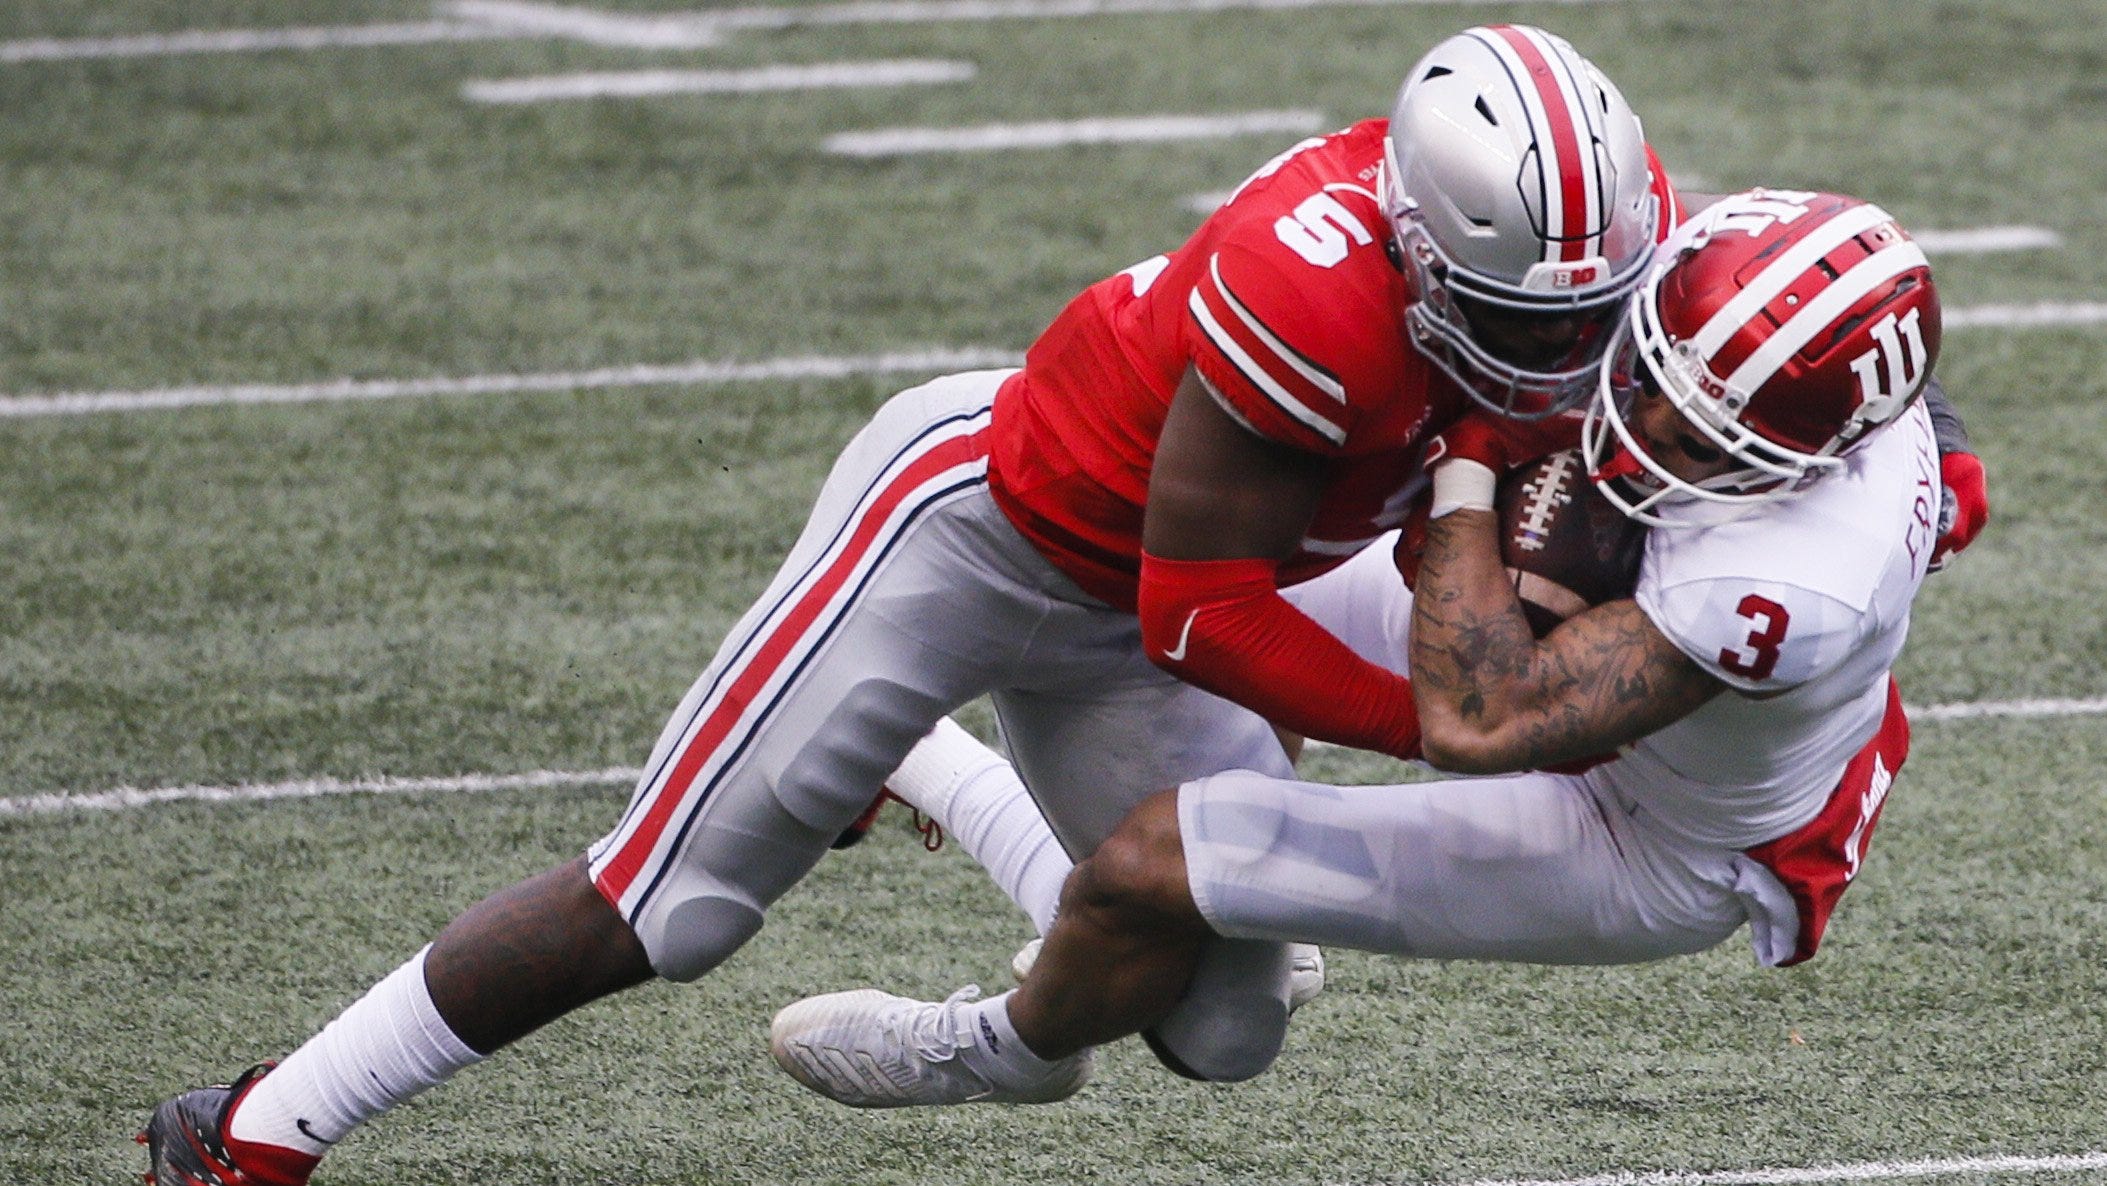 Baron Browning: 3 things to know about the Ohio State linebacker